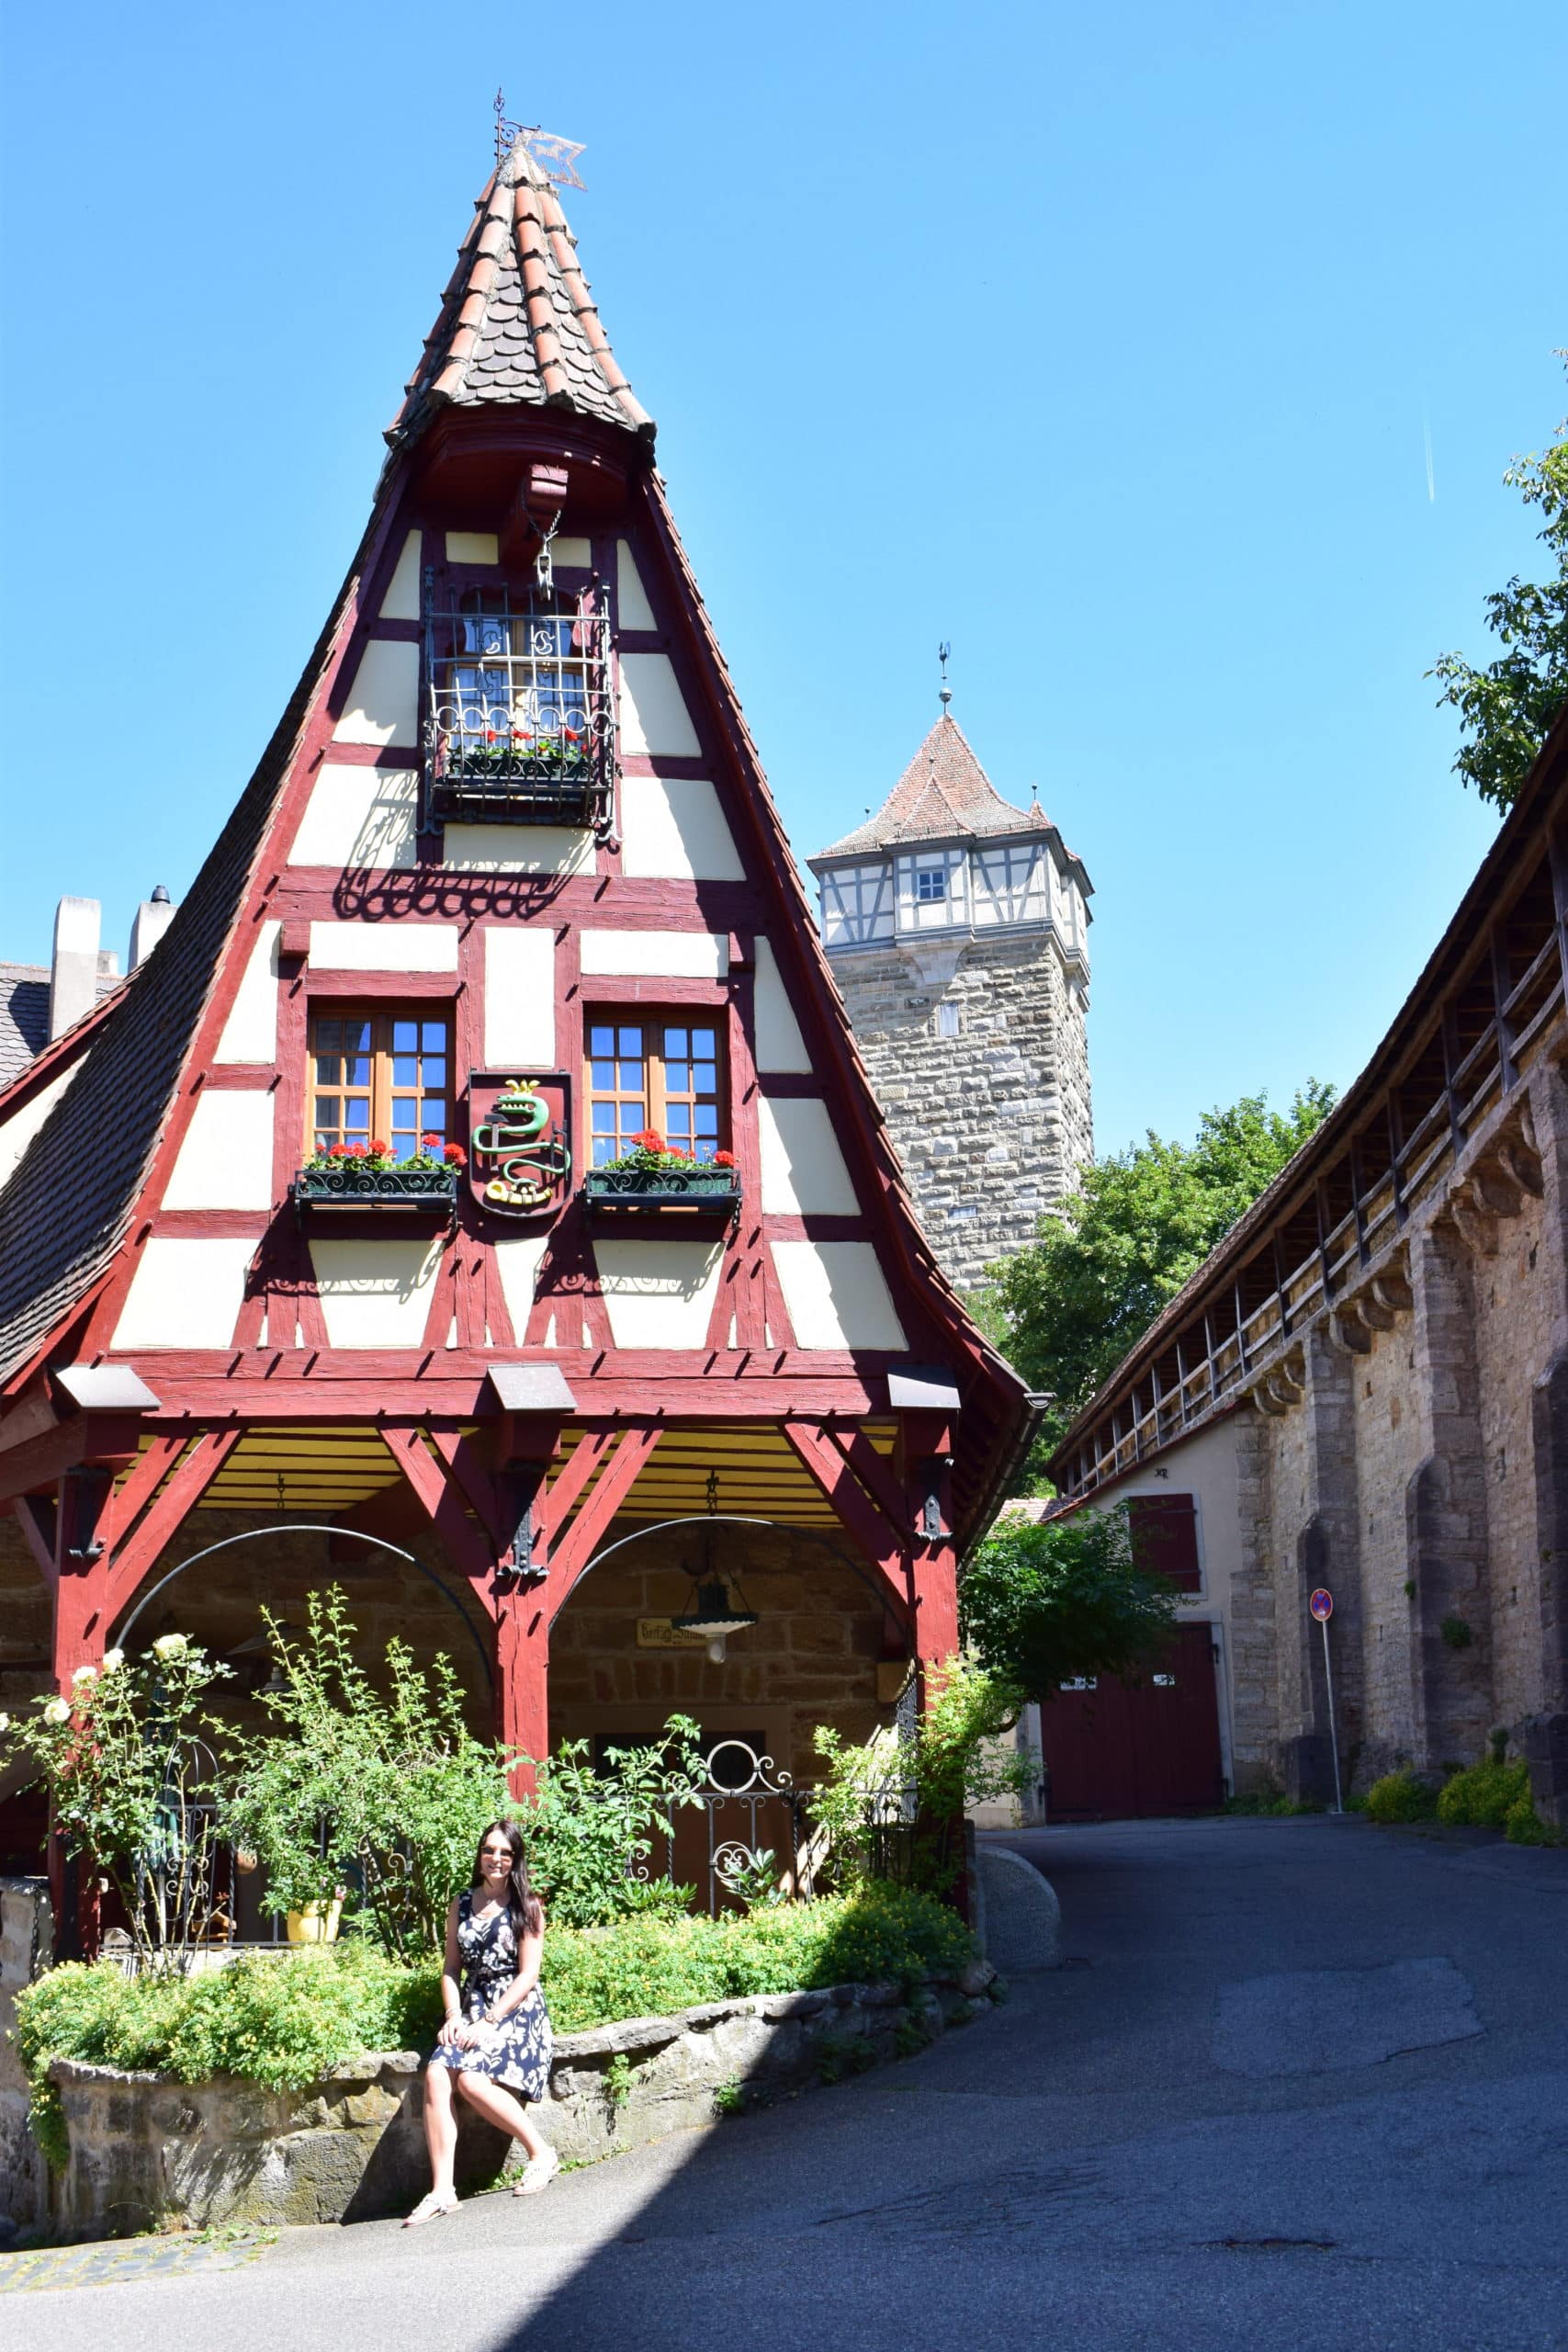 Travel Guide Rothenburg ob der Tauber – visit the most beautiful sights in only 3 hours